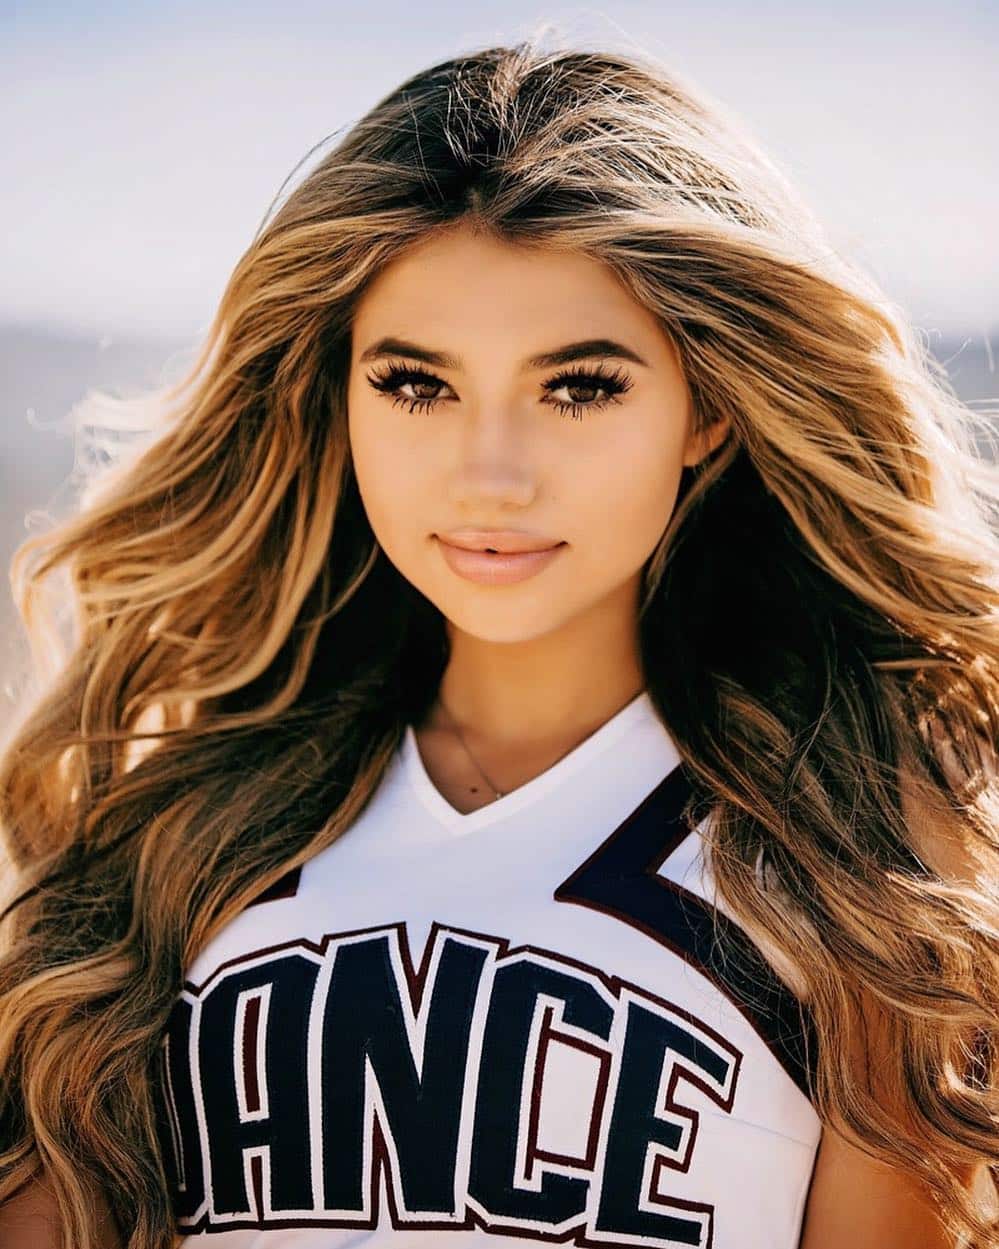 Khia Lopez bio: age, parents, facts and more